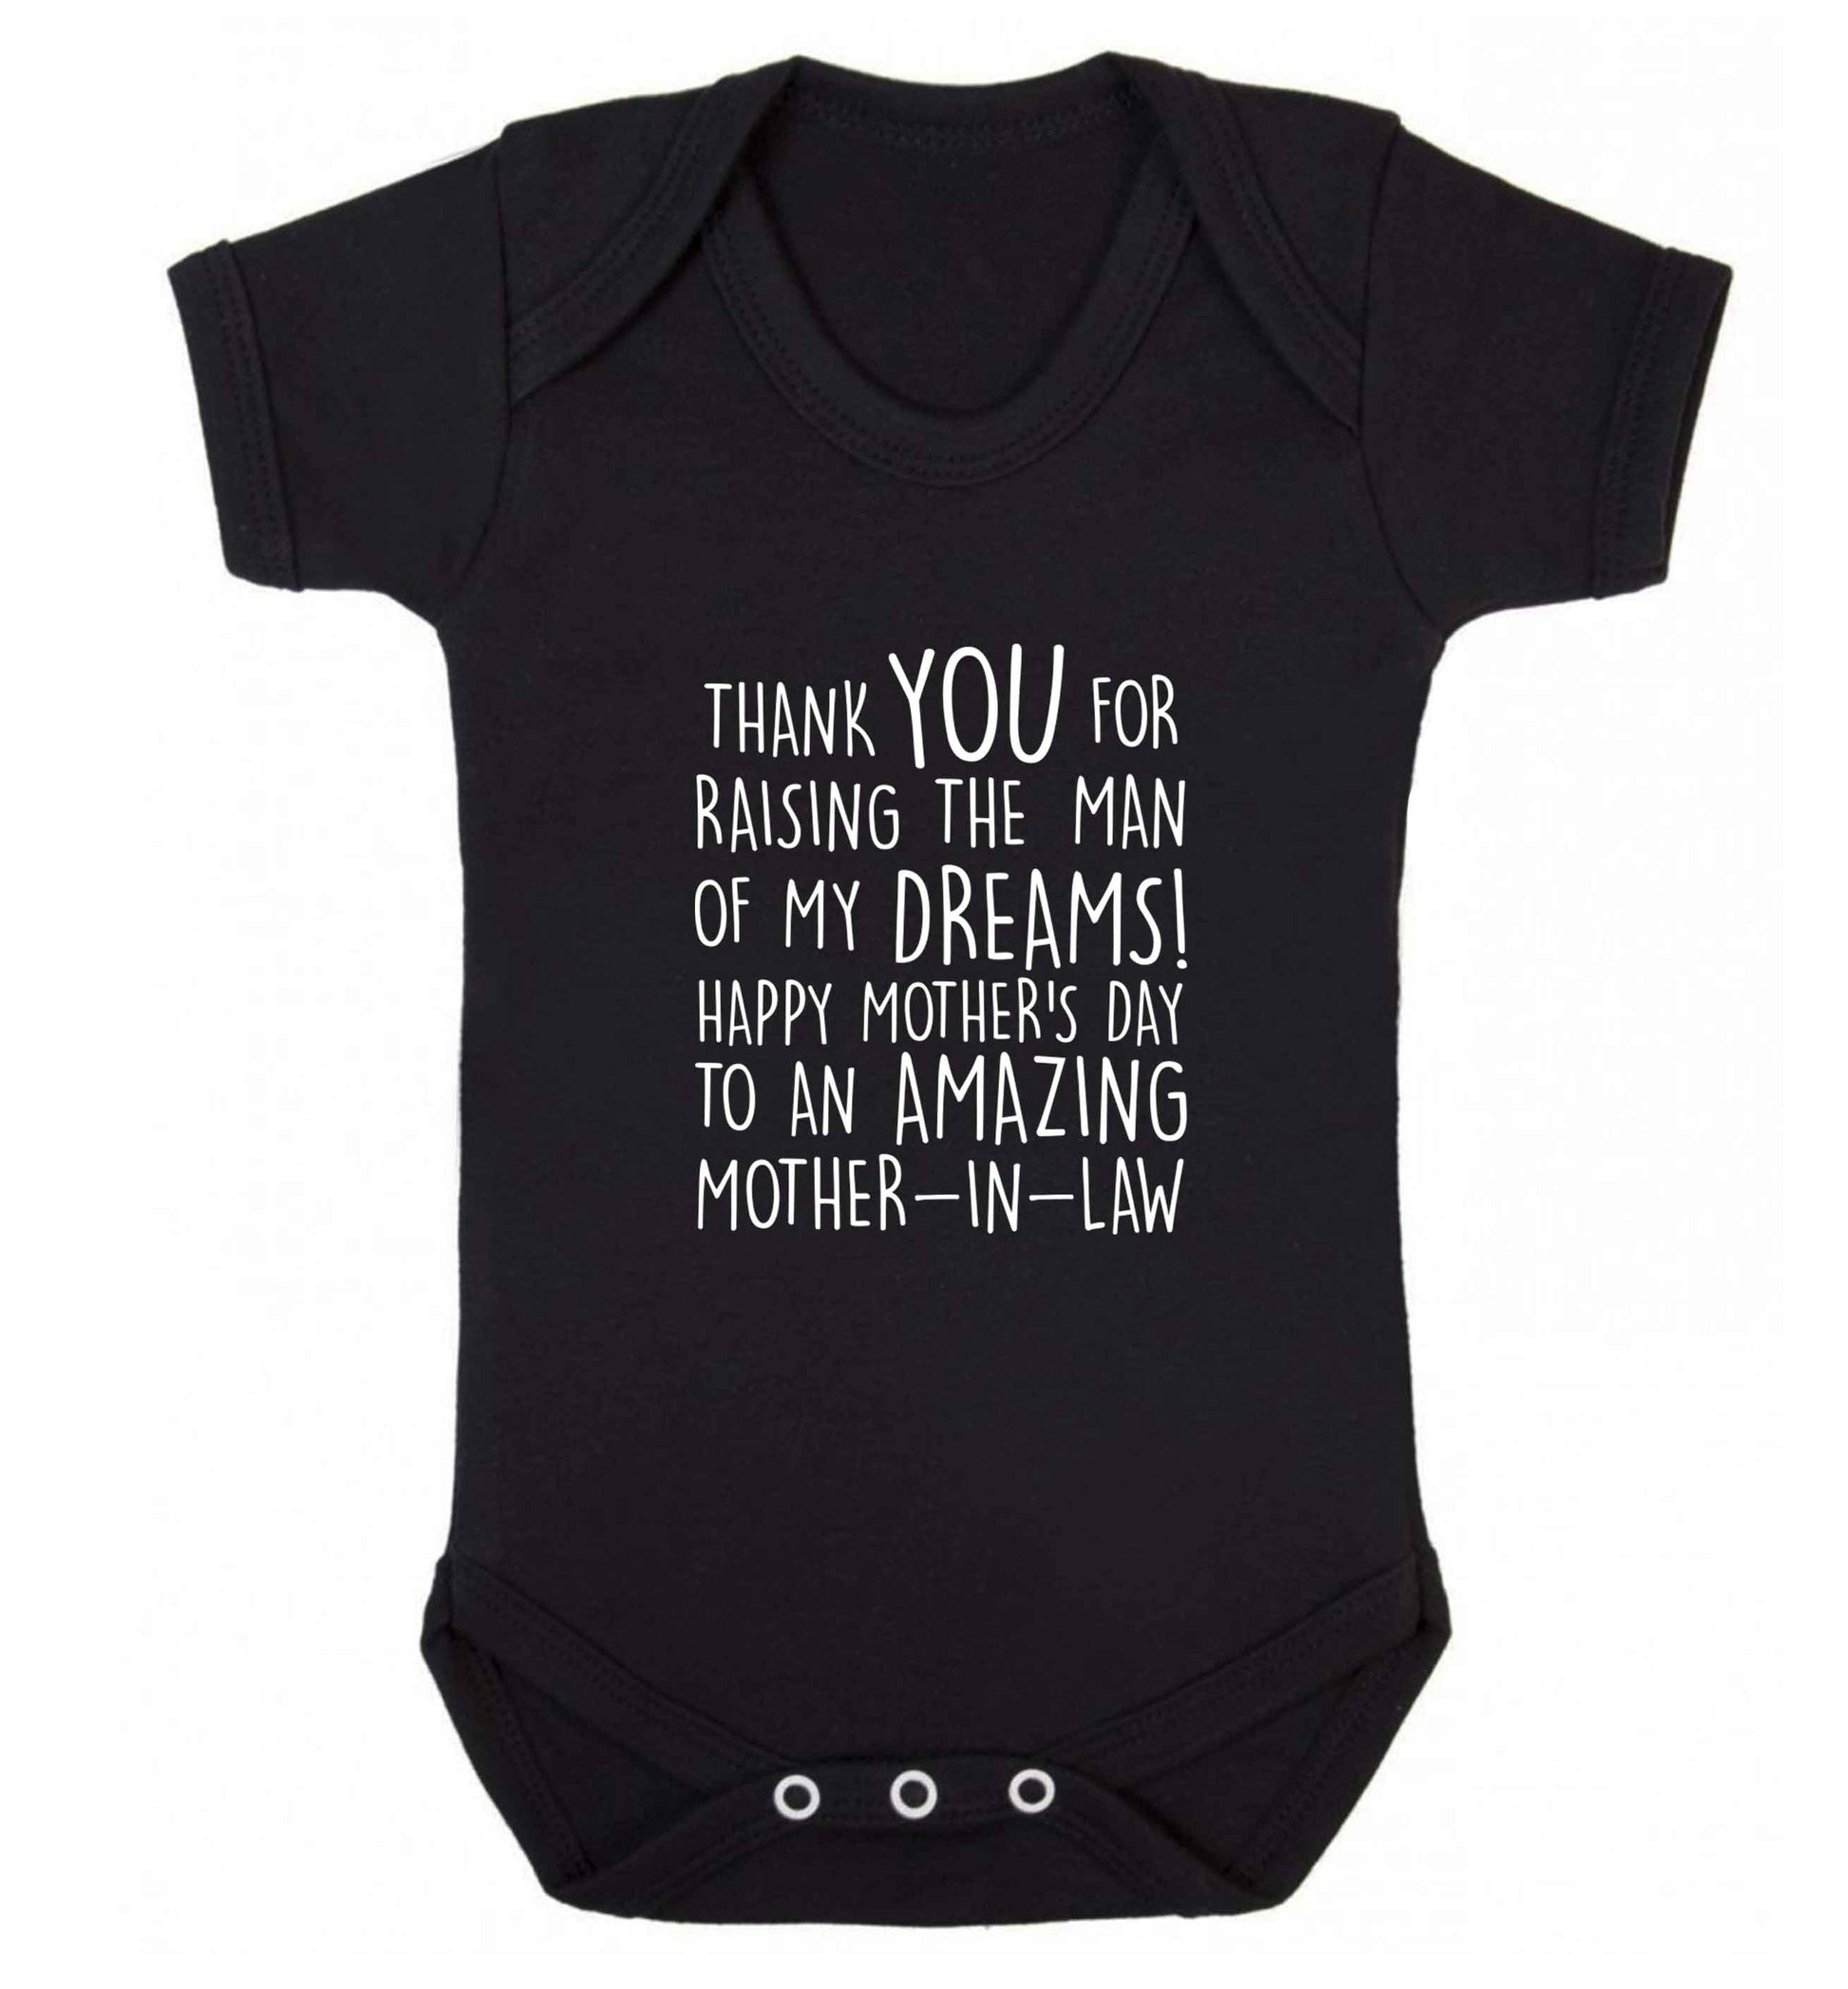 Raising the man of my dreams mother's day mother-in-law baby vest black 18-24 months